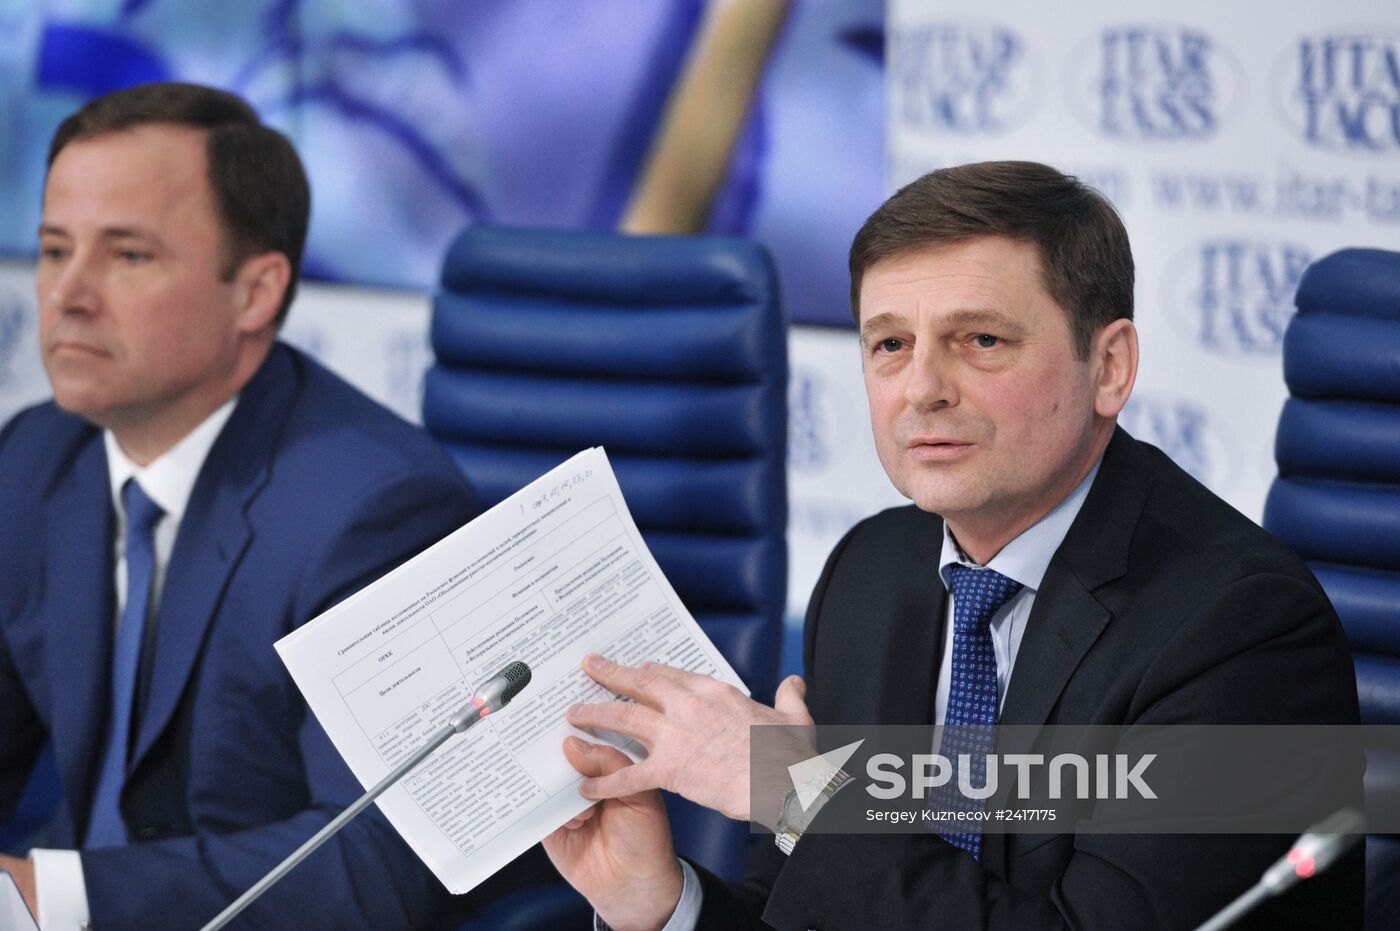 Press conference by Russia's Federal Space Agency and United Rocket and Space Corporation managers